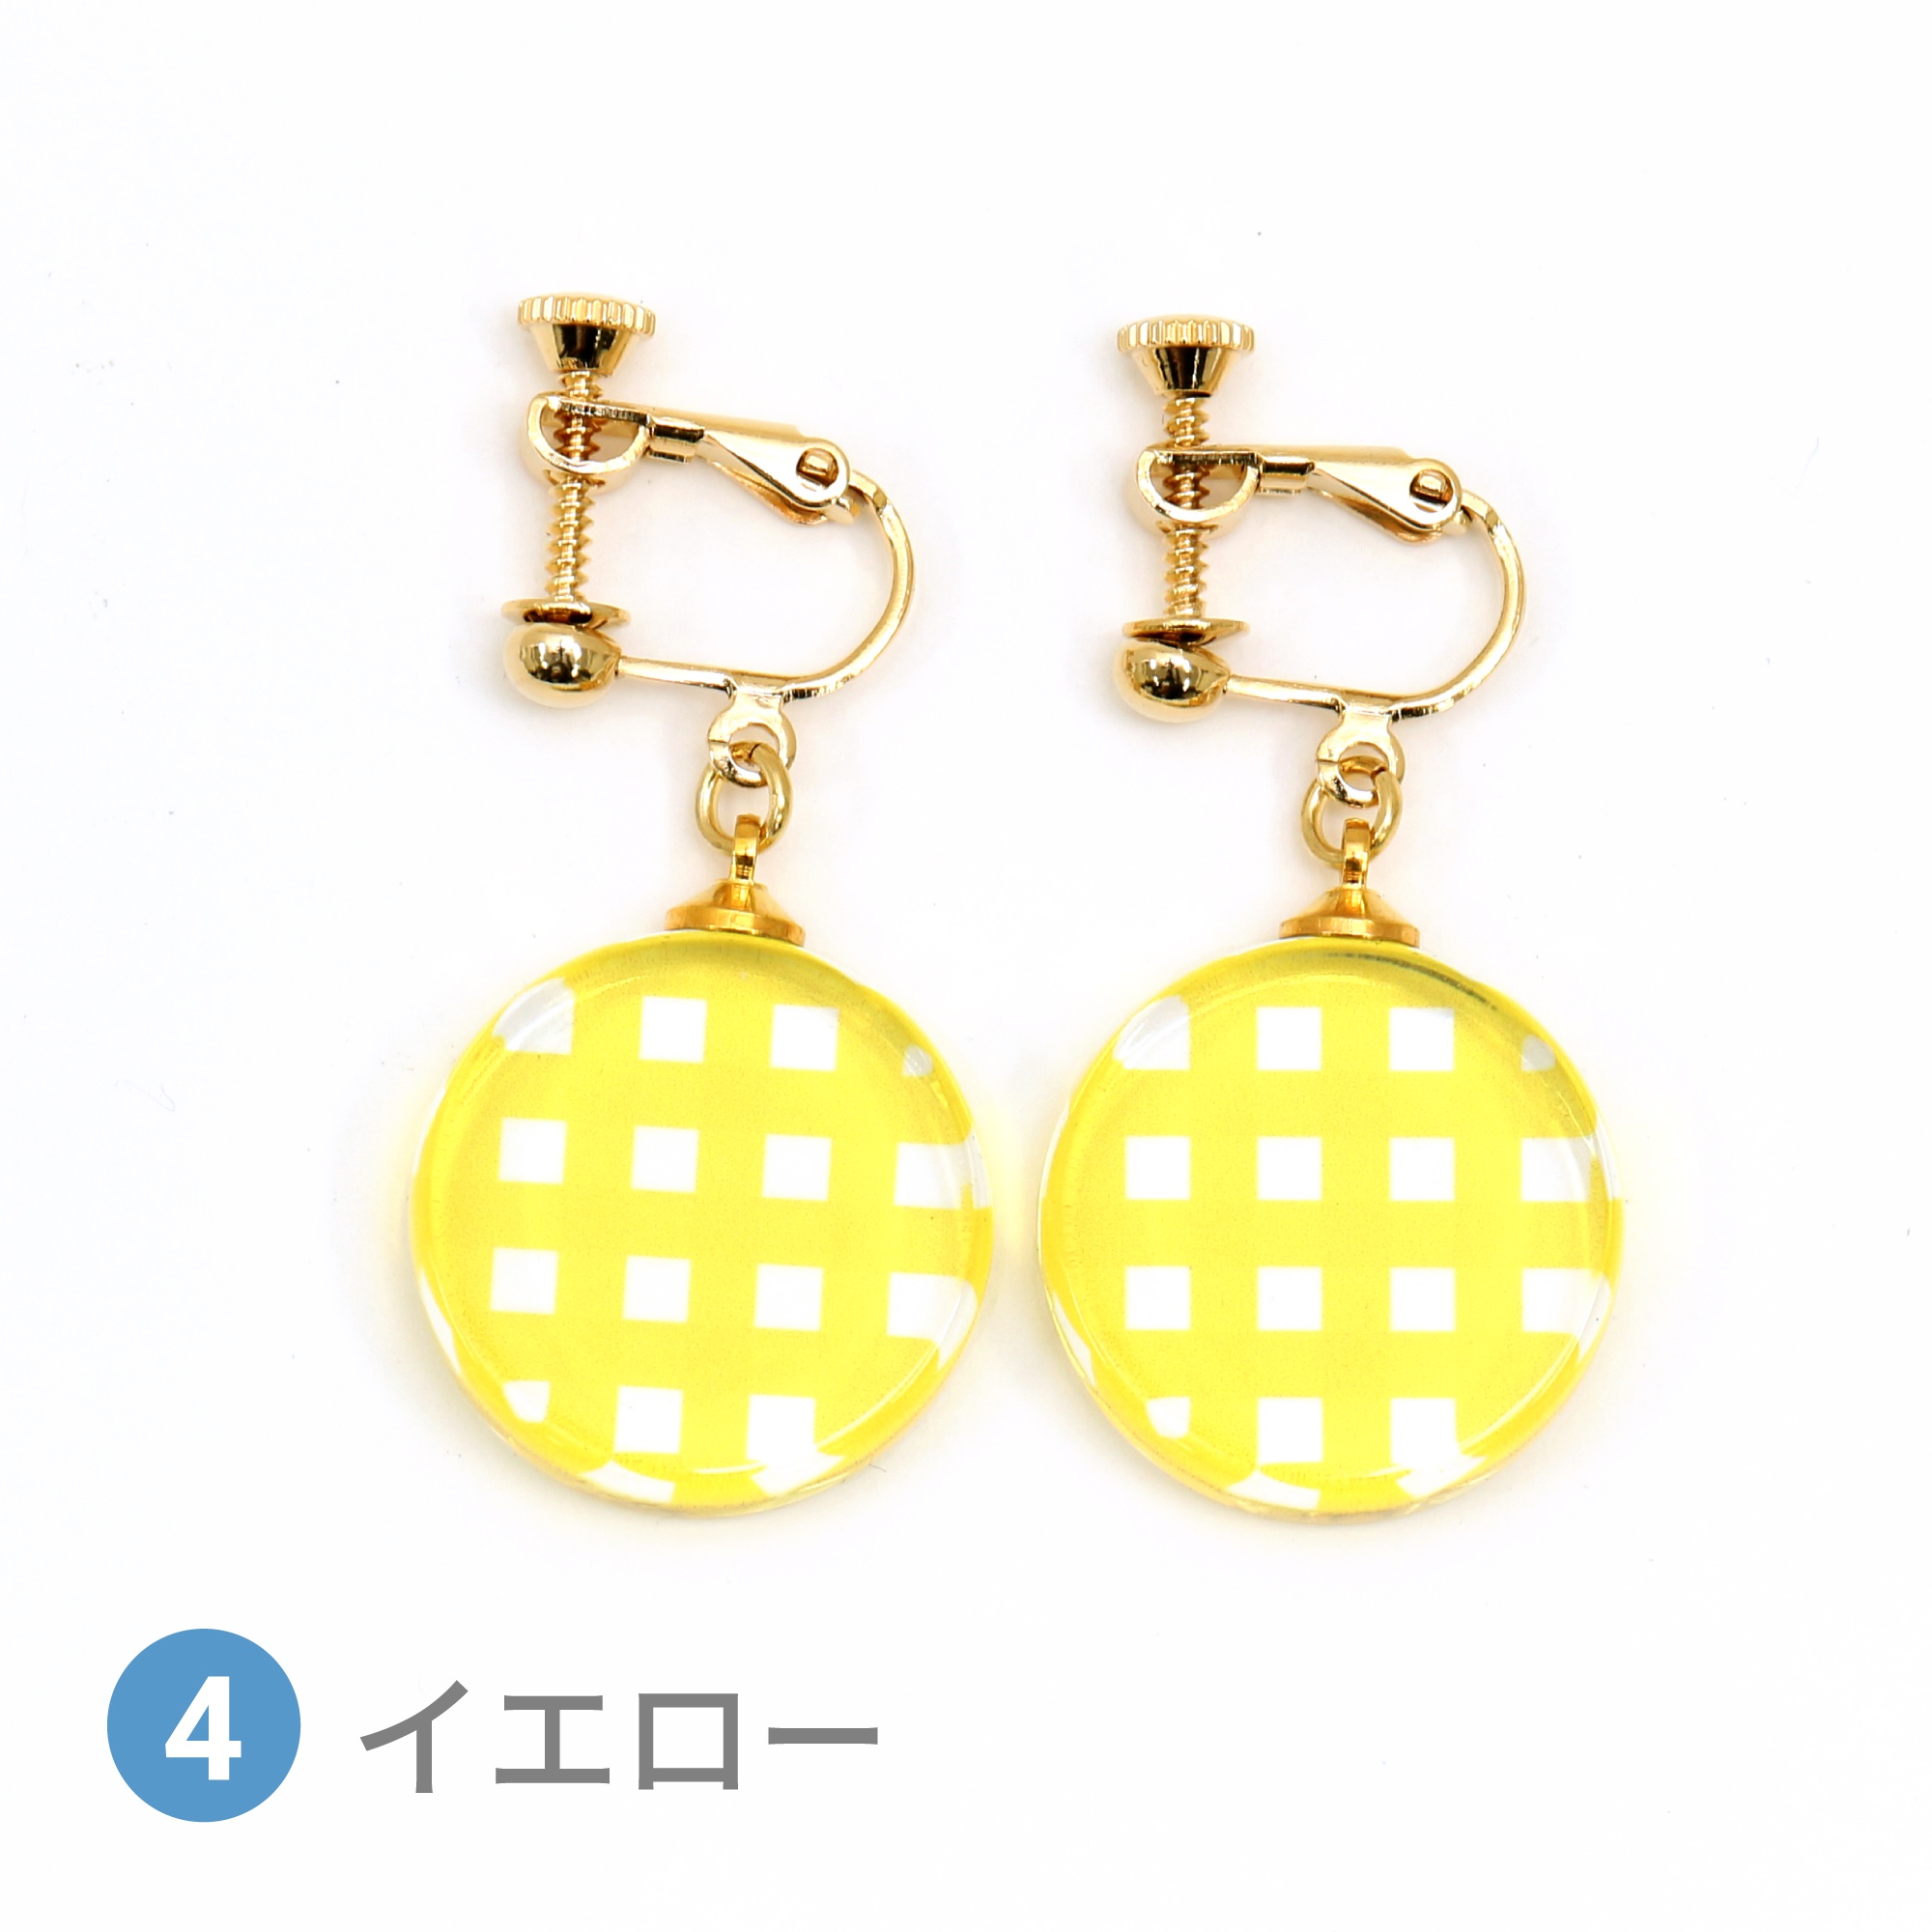 Glass accessories Earring GINGHAM CHECK yellow round shape